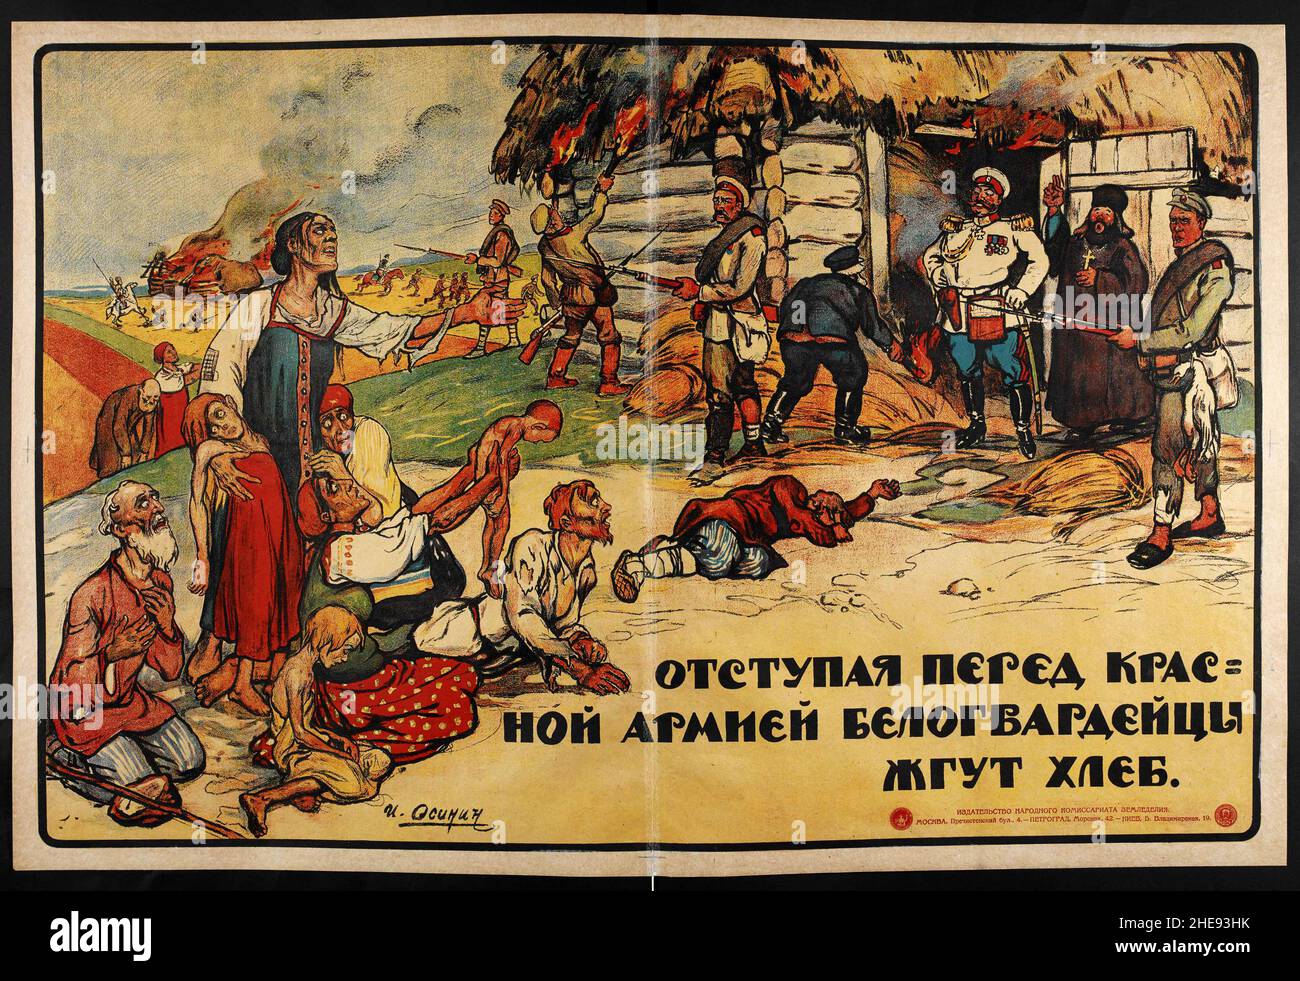 A Soviet propaganda poster showing White Russian soldiers burning a village with the caption 'Retreating, the Whites are burning crops' Stock Photo